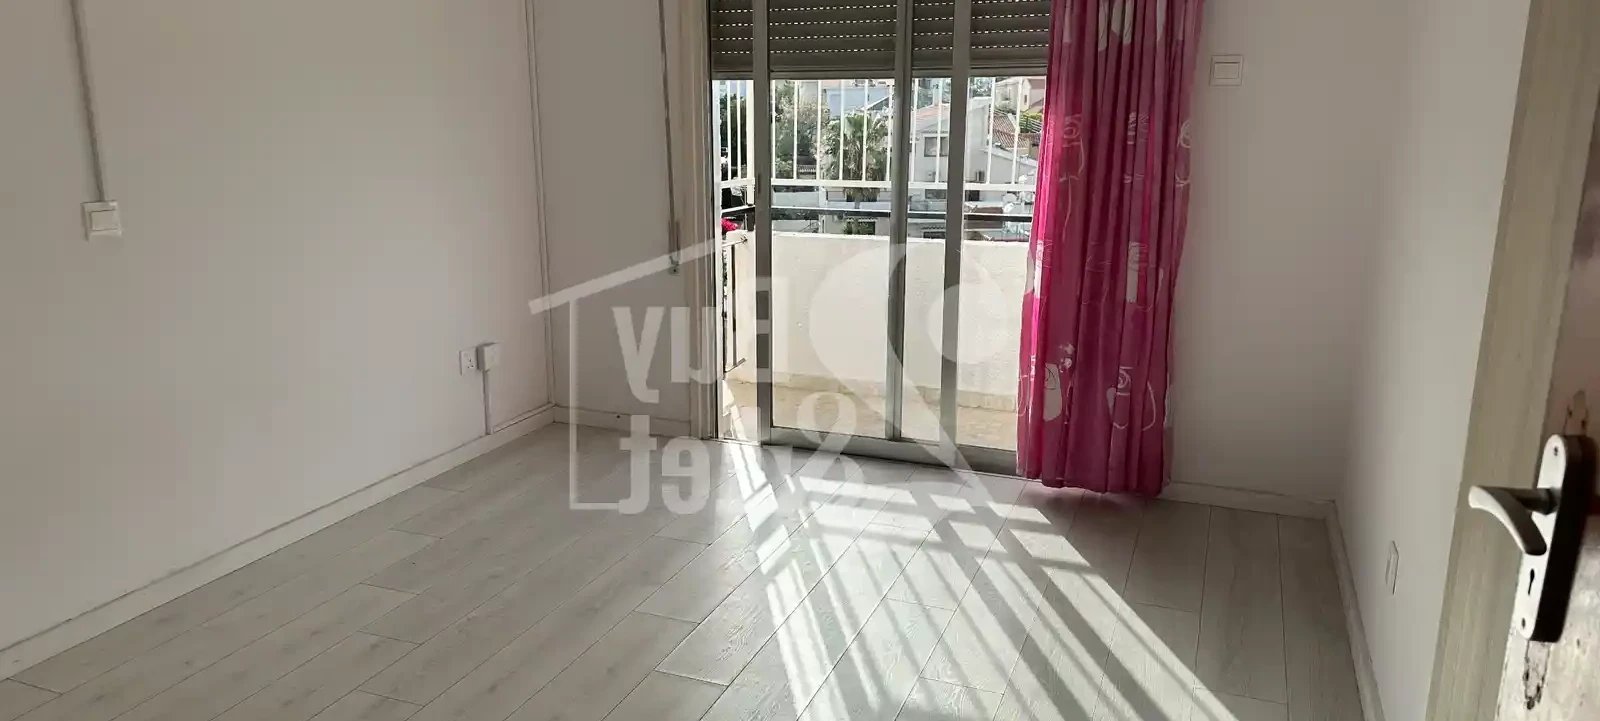 2-bedroom apartment fоr sаle €200.000, image 1